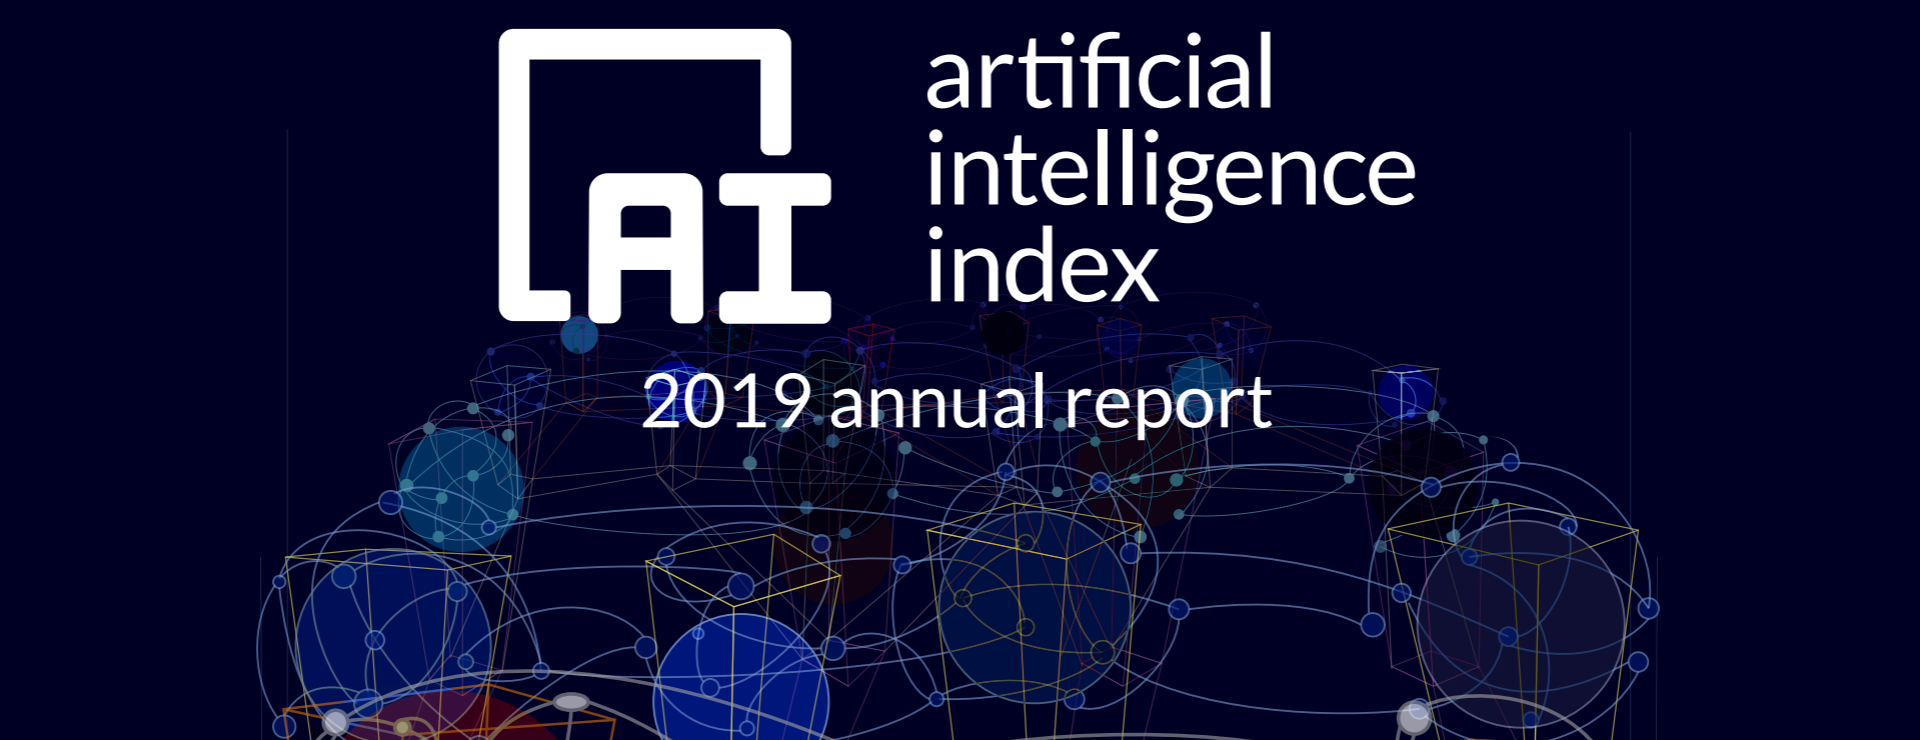 Stanford’s HAI Artificial Intelligence Index 2019 Annual Report The